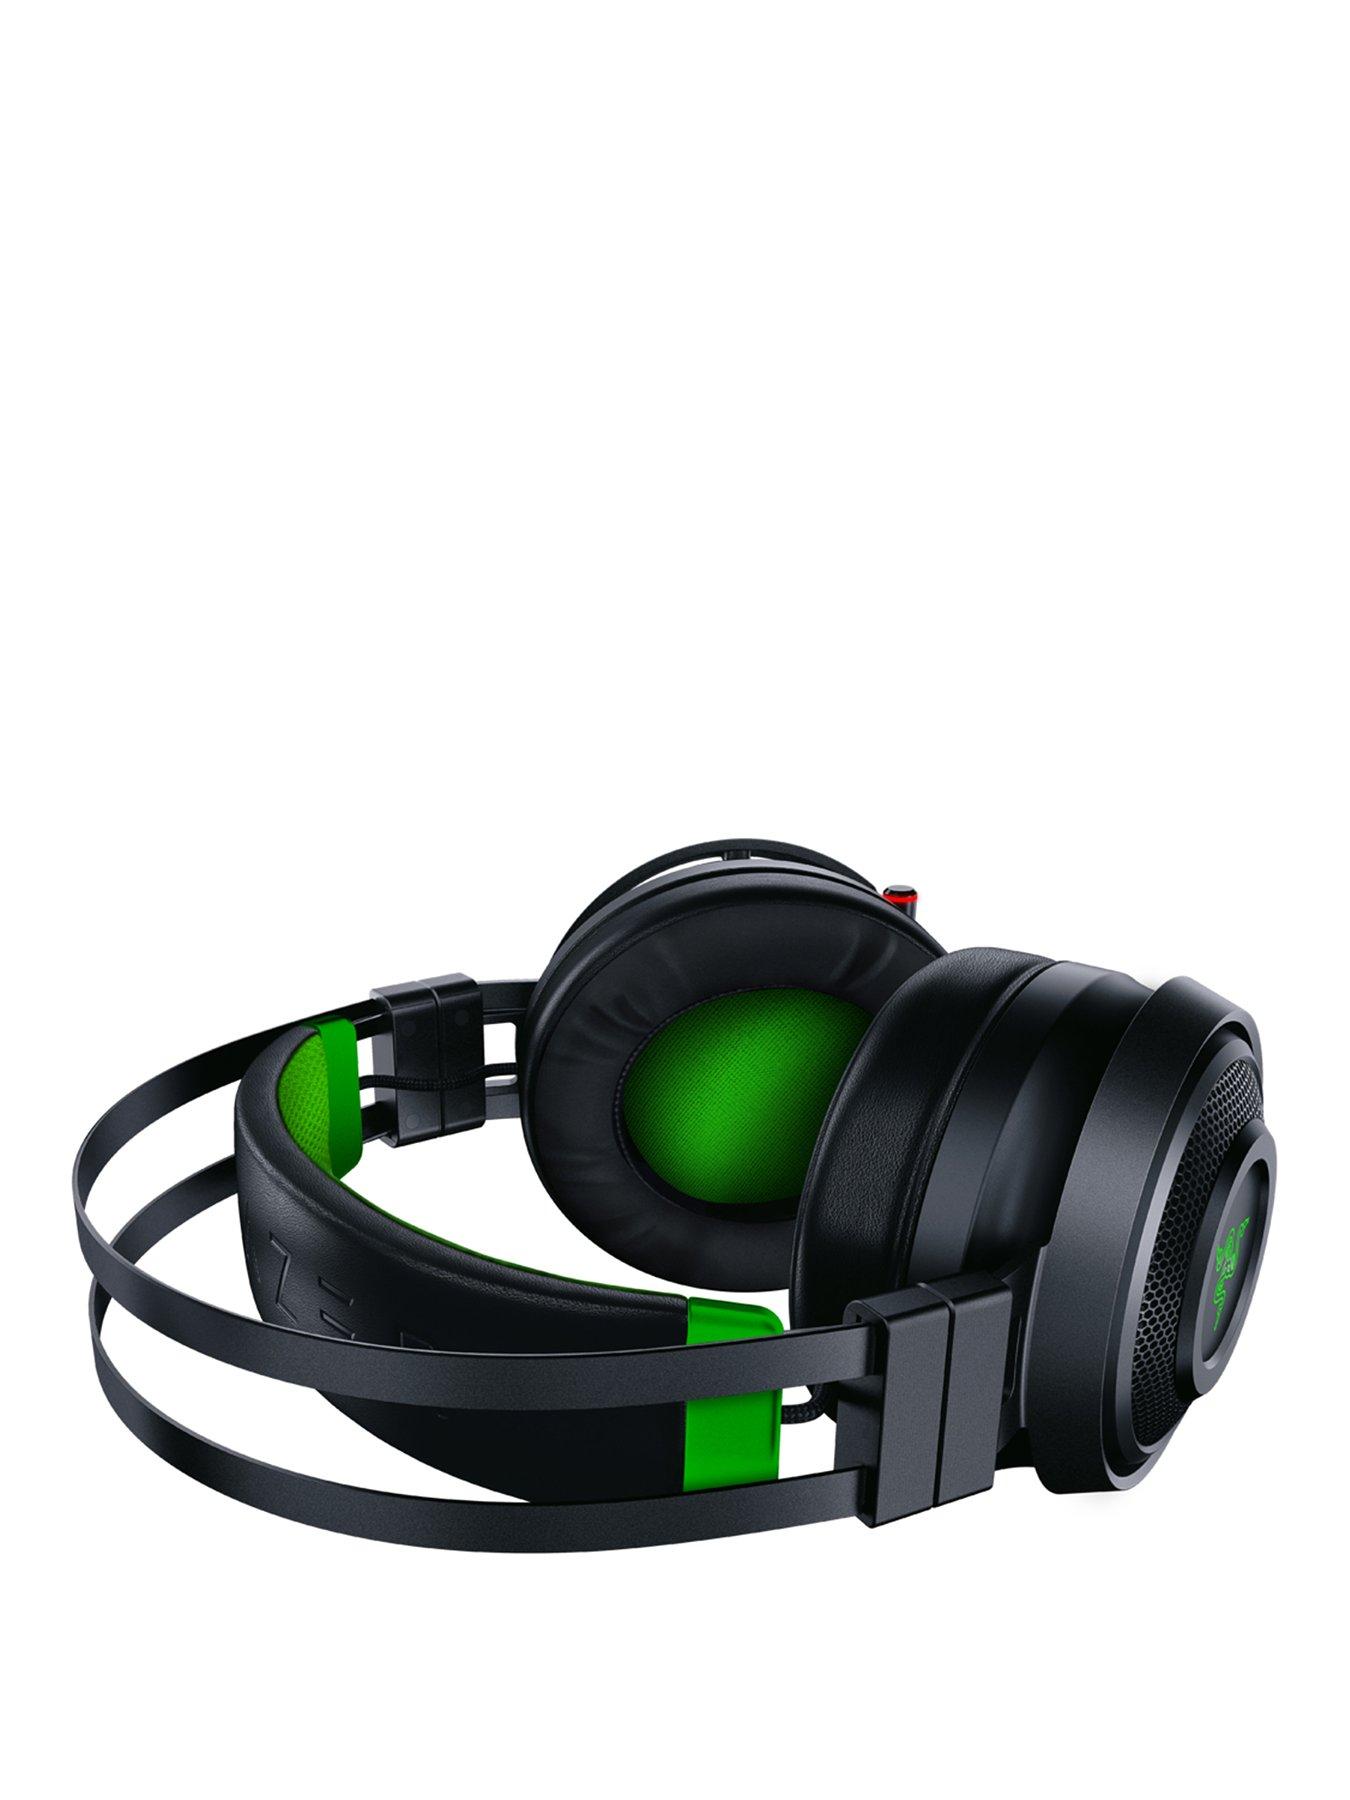 Razer Nari Ultimate For Xbox One Wir Littlewoods Com